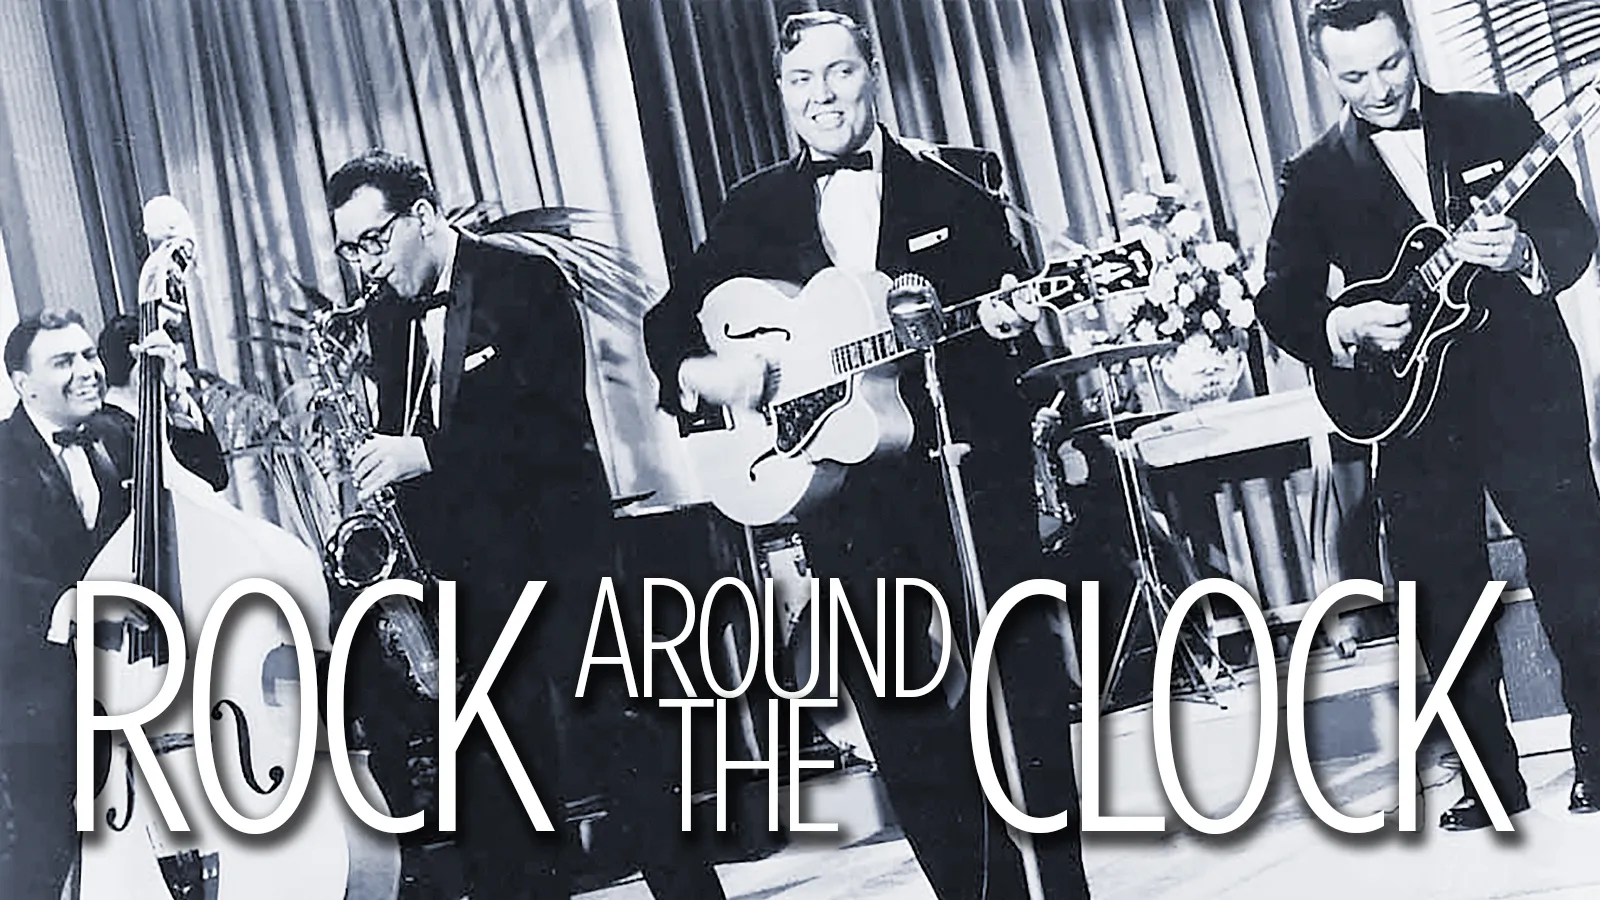 A photo of a live performance of Rock Around The Clock by Bill Haley and His Comets.